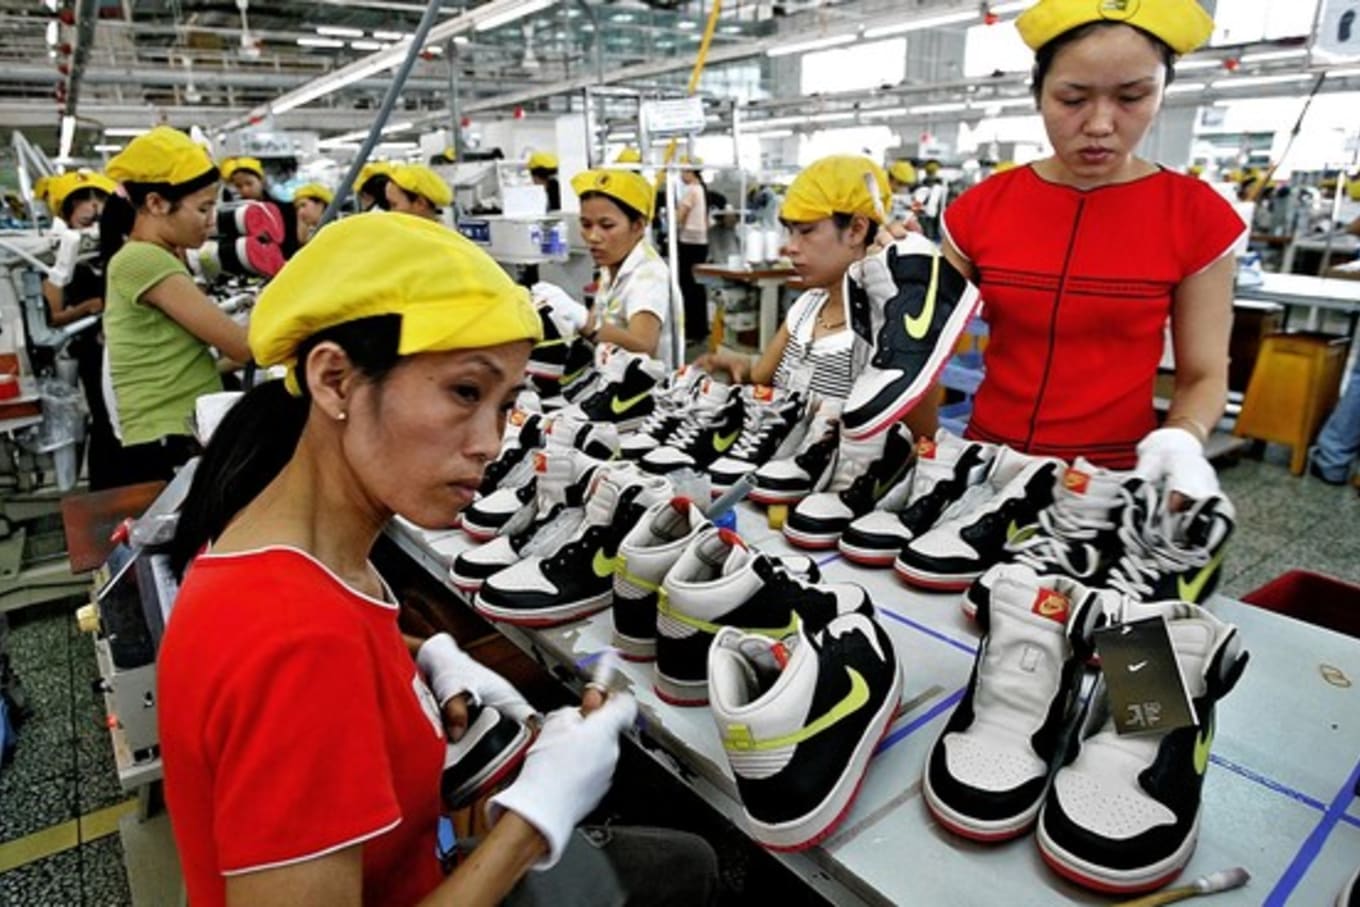 puma workers